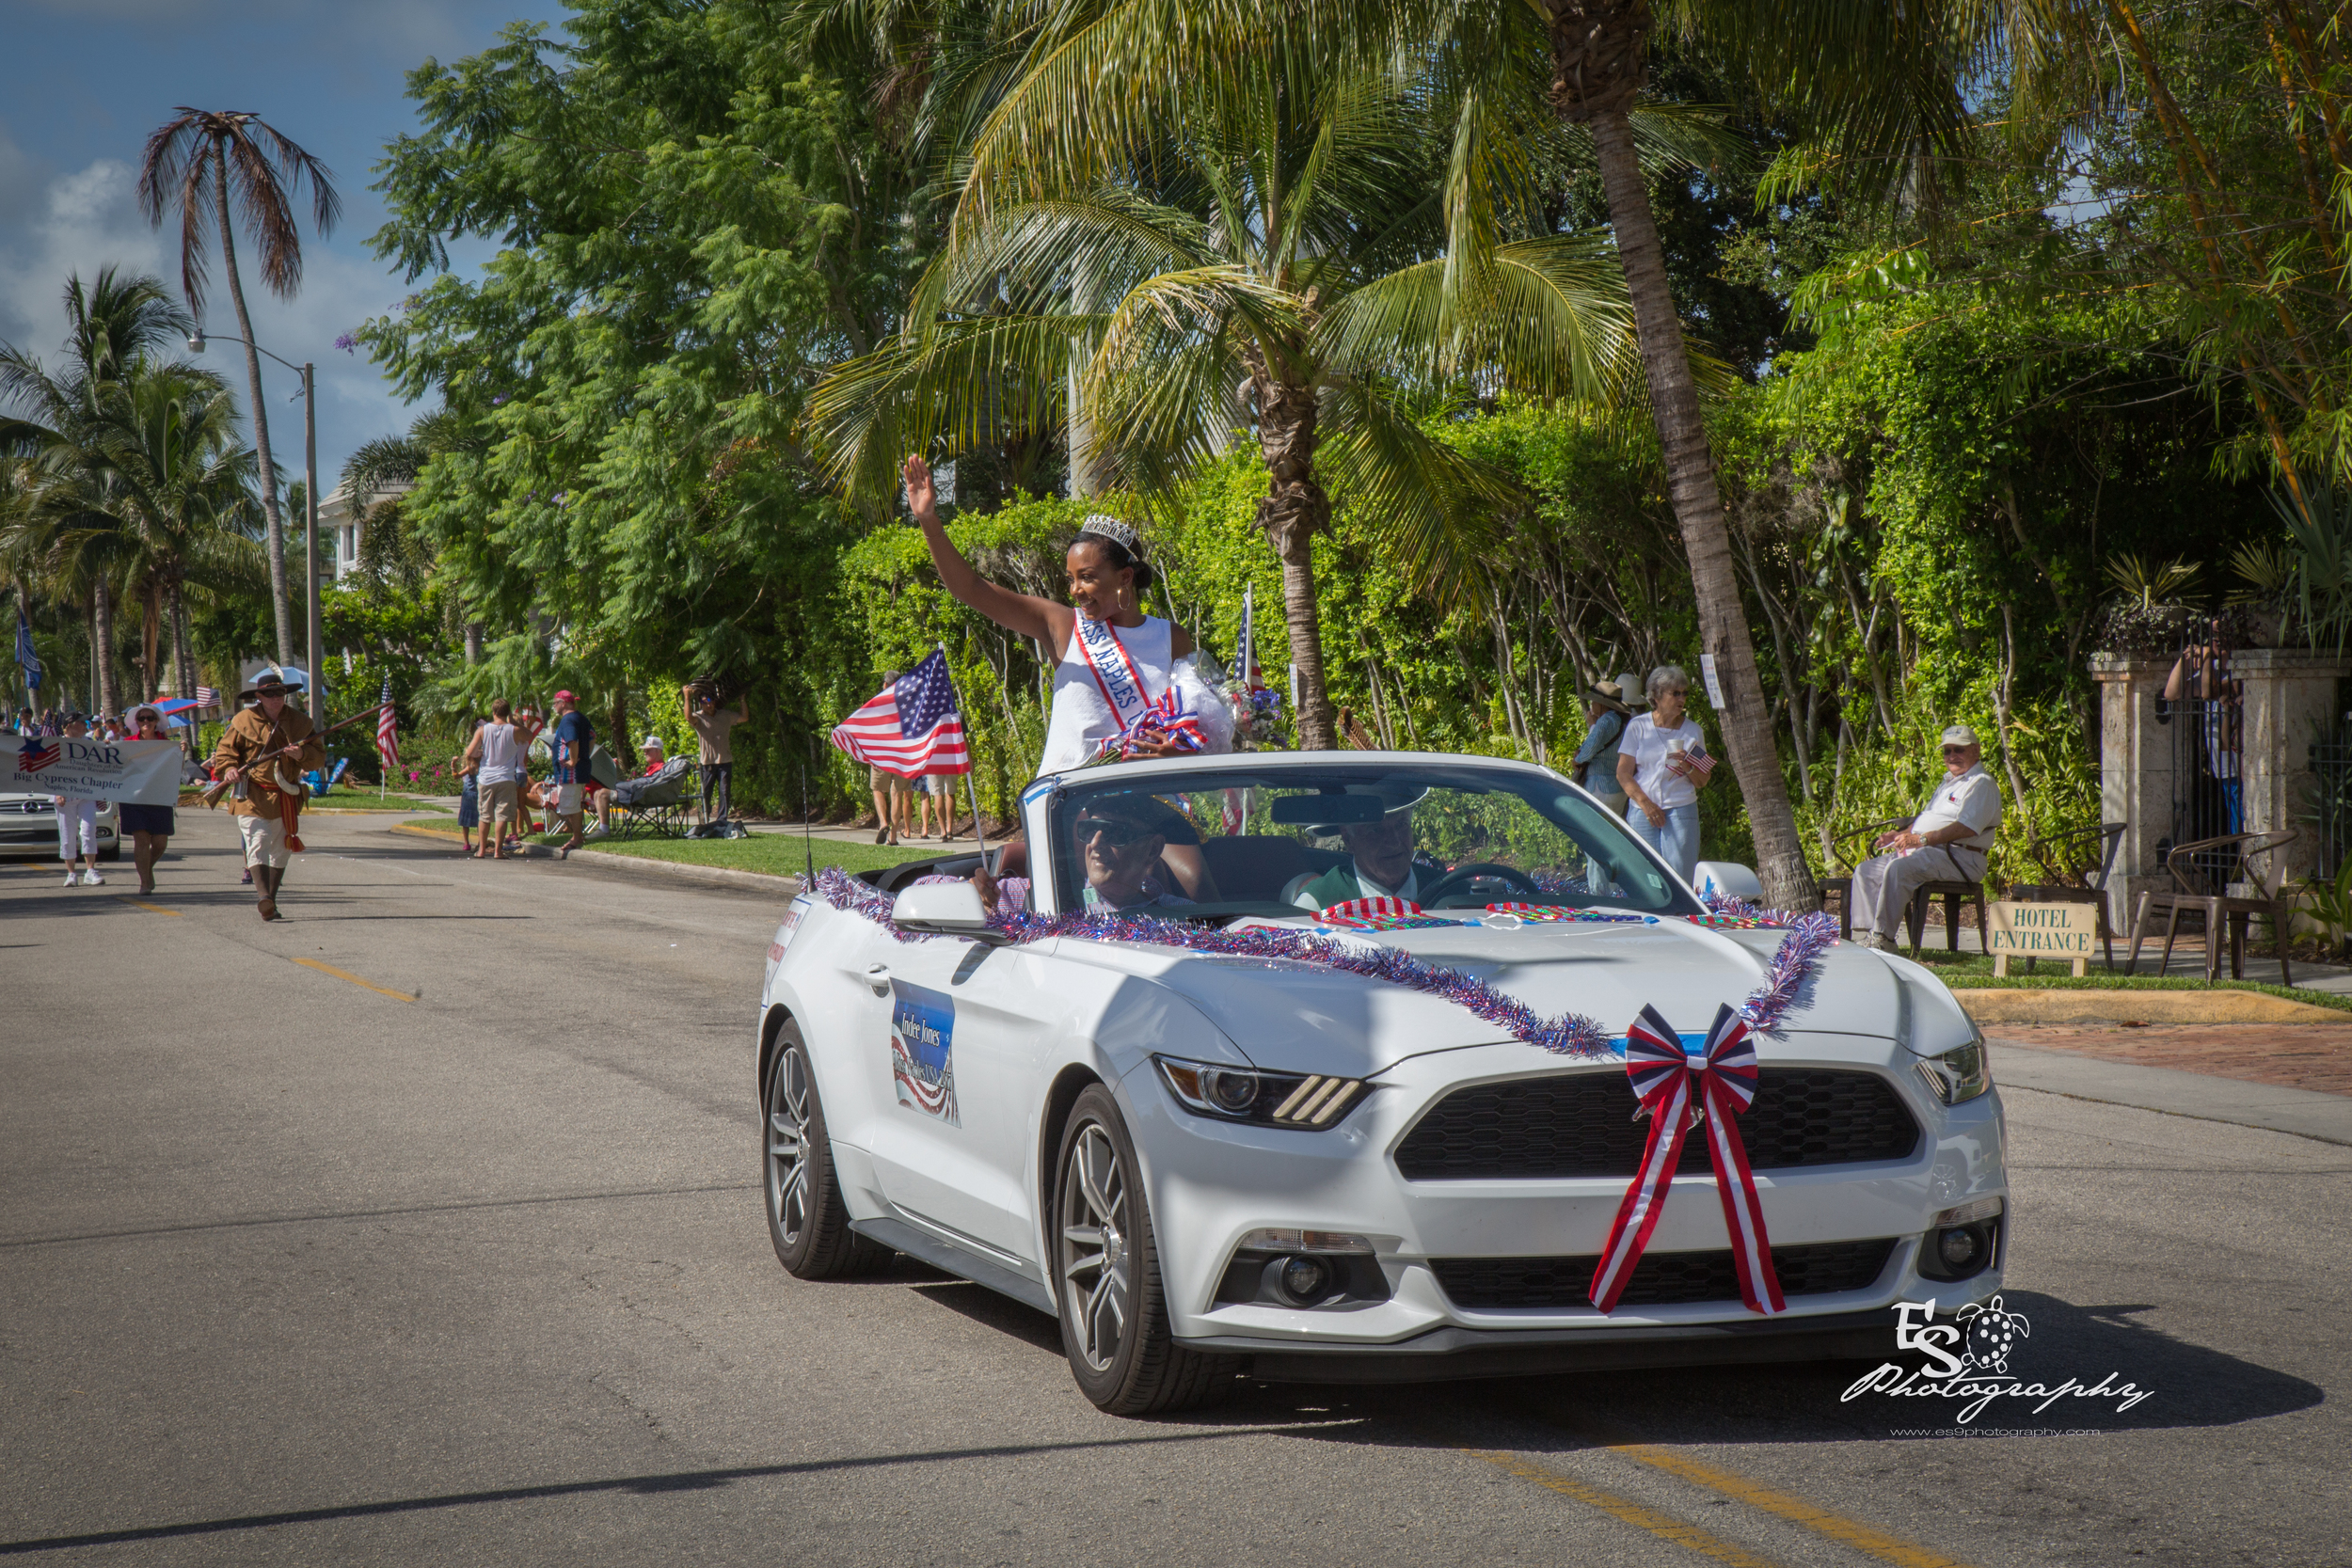 City of Naples July 4th Parade 2016 @ ES9 Photography 2016-22.jpg